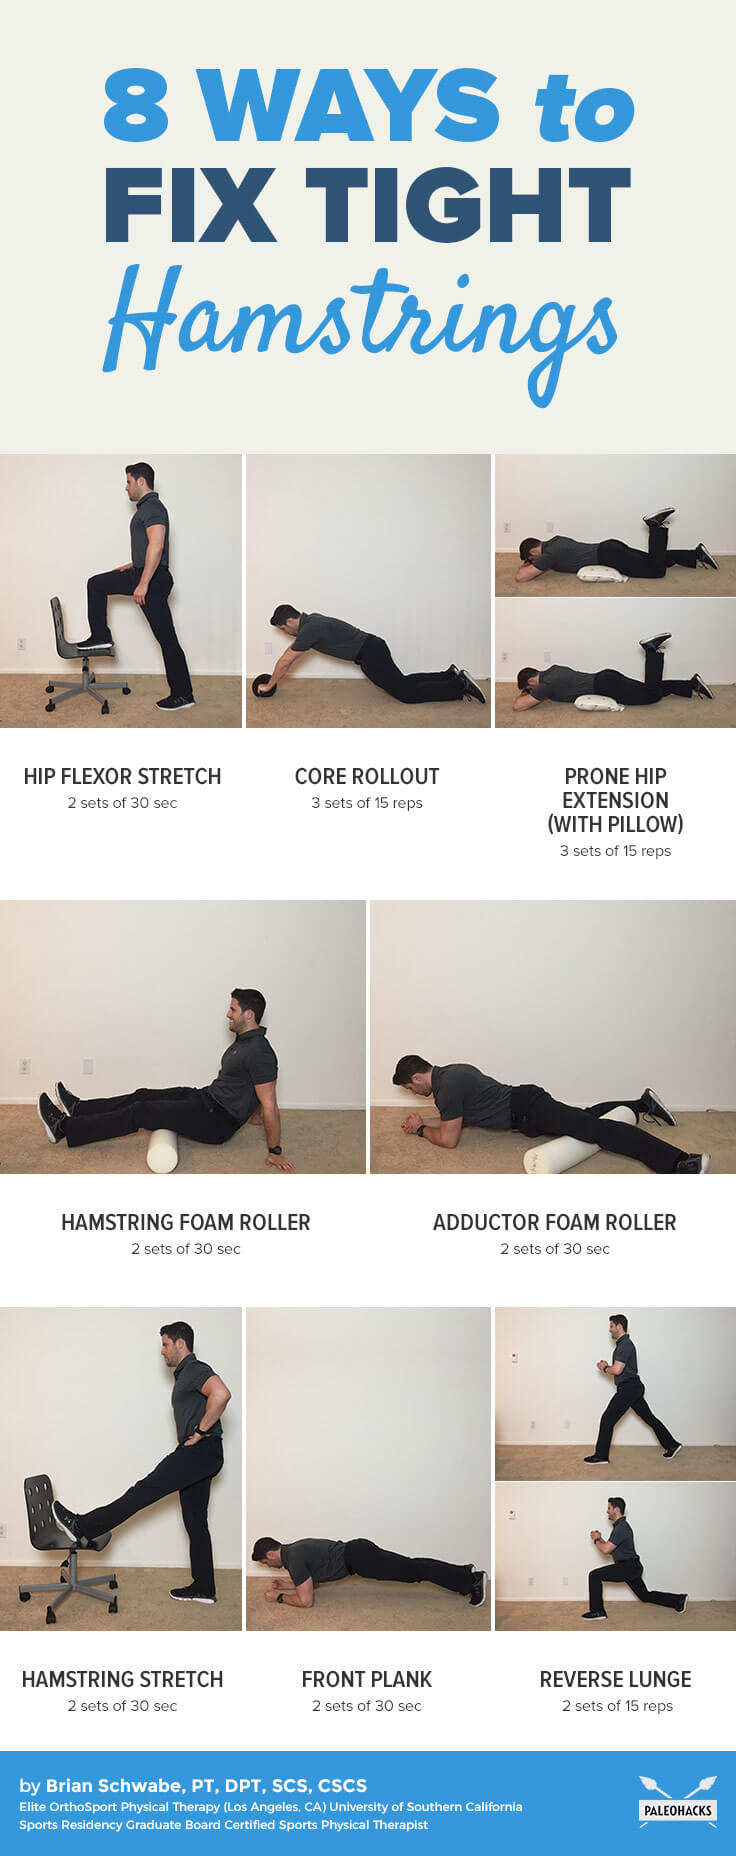 Between daily activities and working out, we get stiff throughout our body, and can especially suffer from tight hamstrings. Here's how to stretch them!